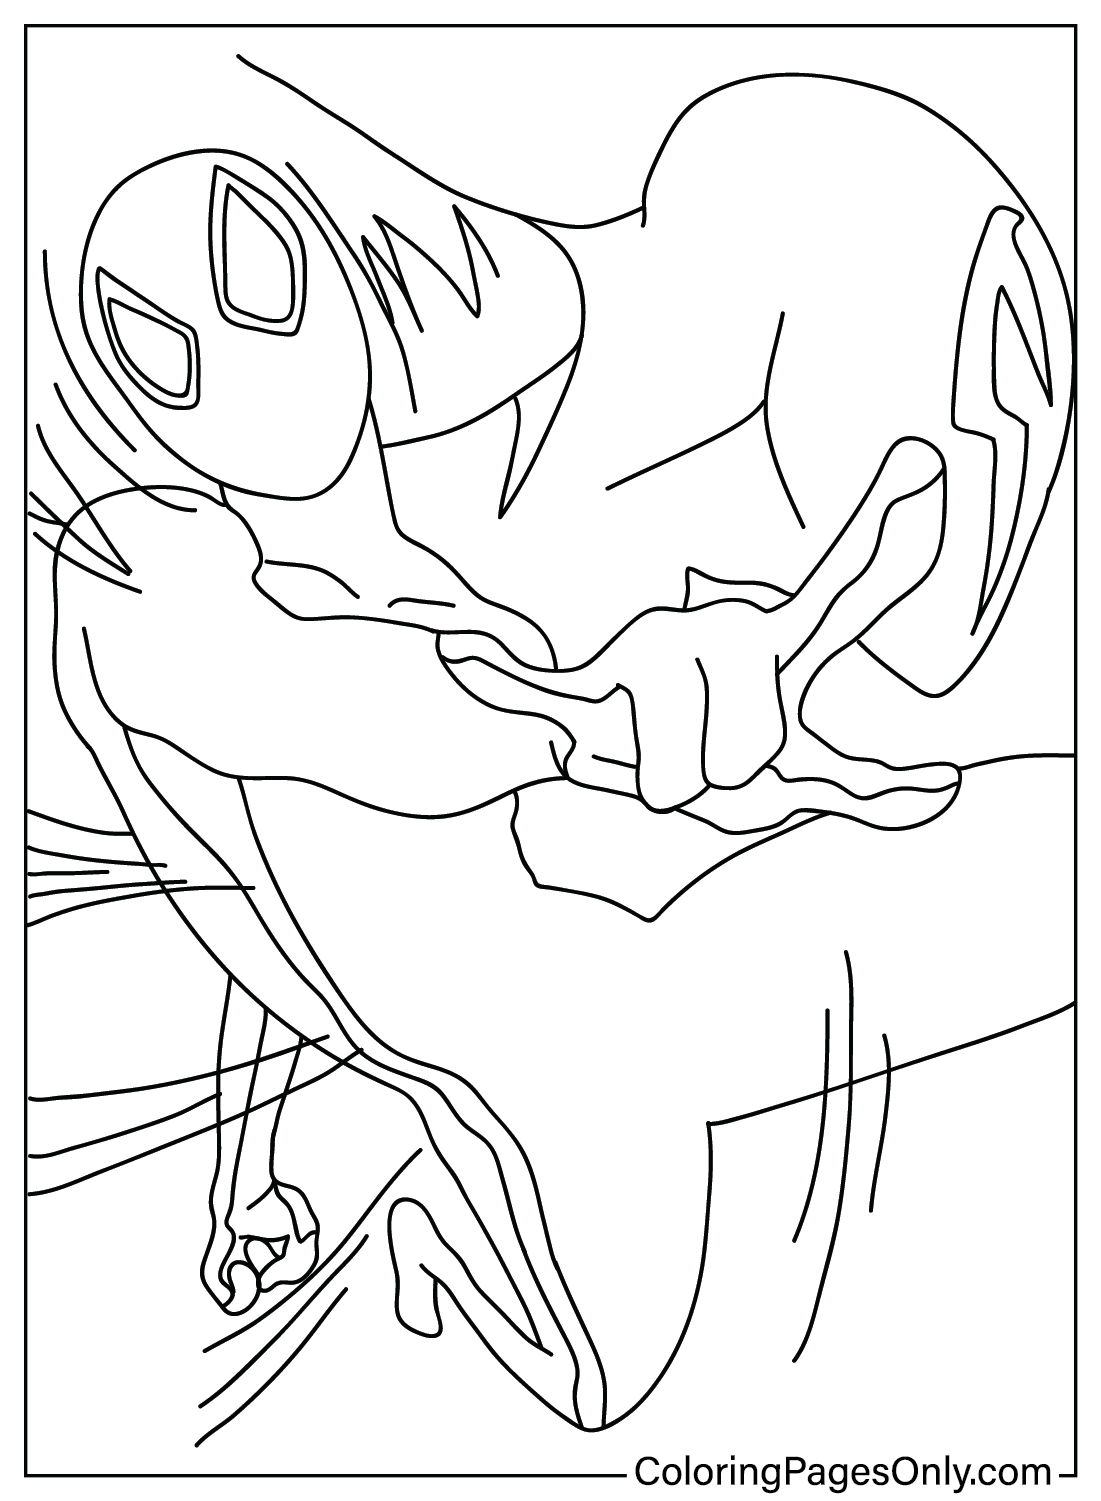 Spider-Man Across the Spider Coloring Page Free